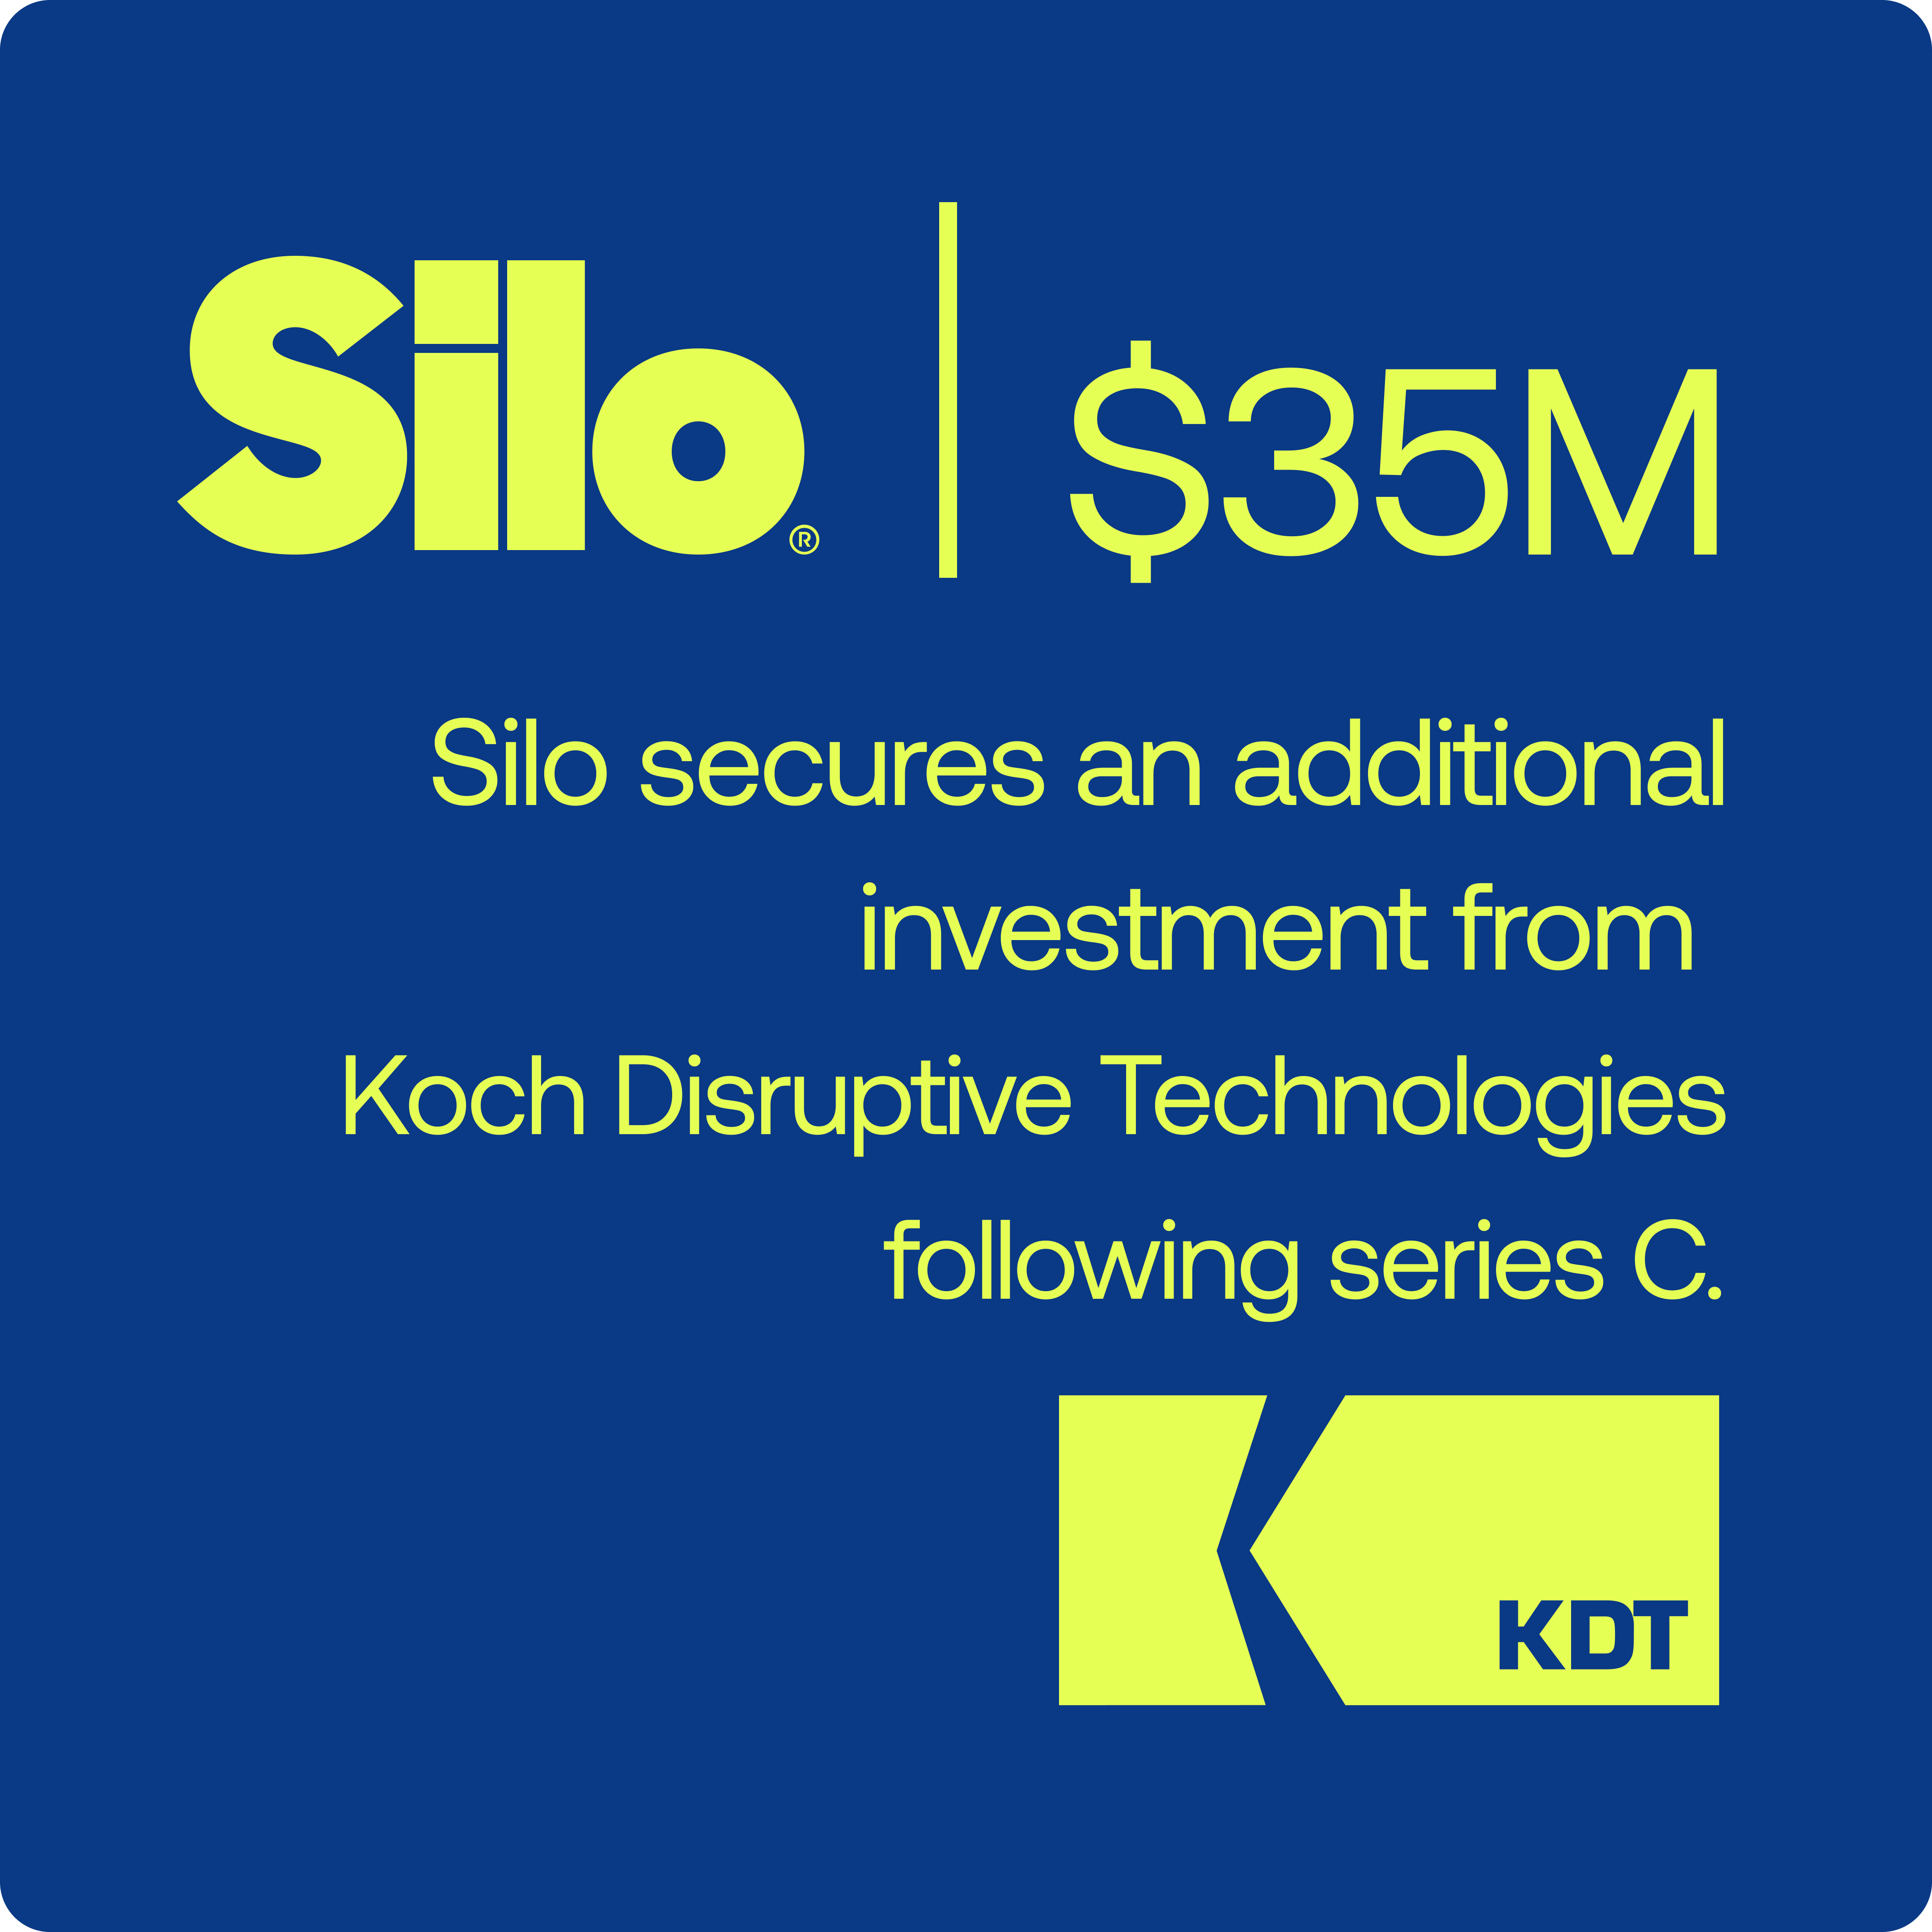 Silo's Momentum: Fueling Innovation and Growth with KDT Investment